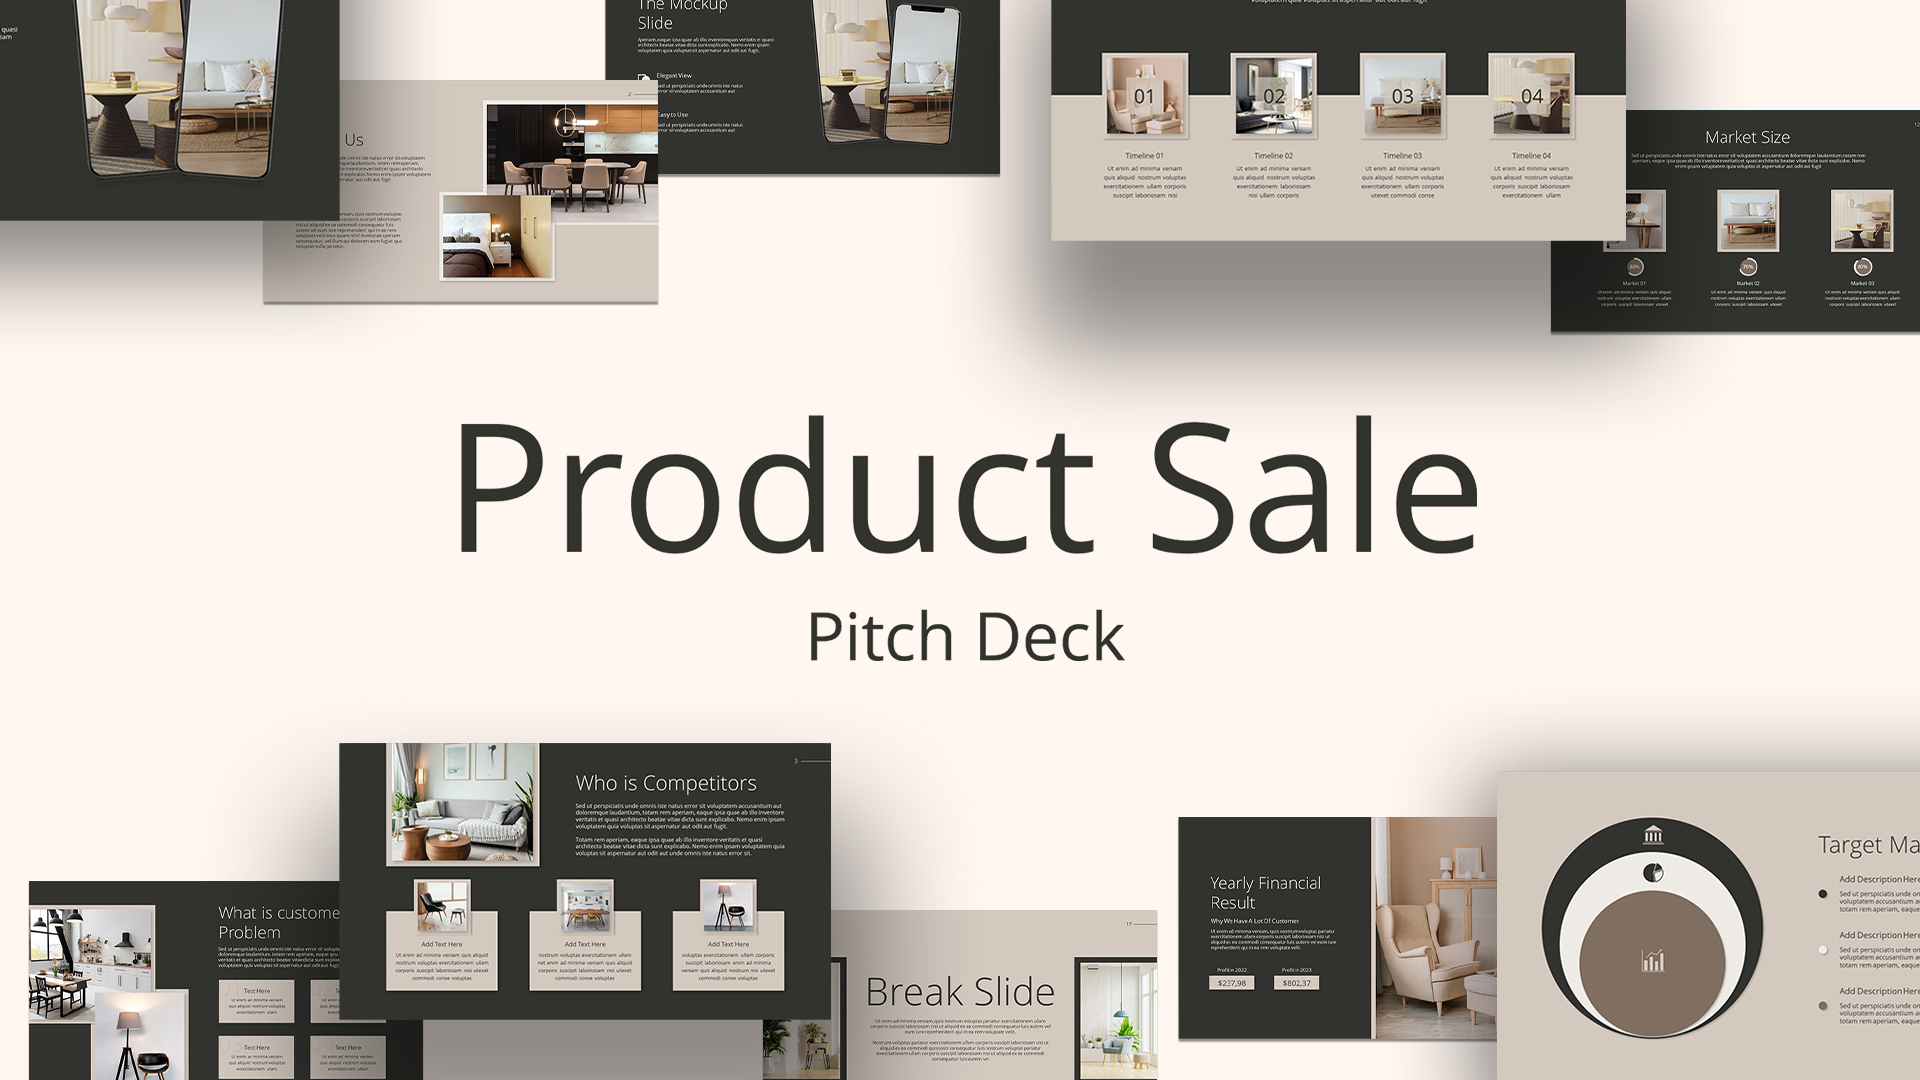 Product Sales PowerPoint Pitch Deck